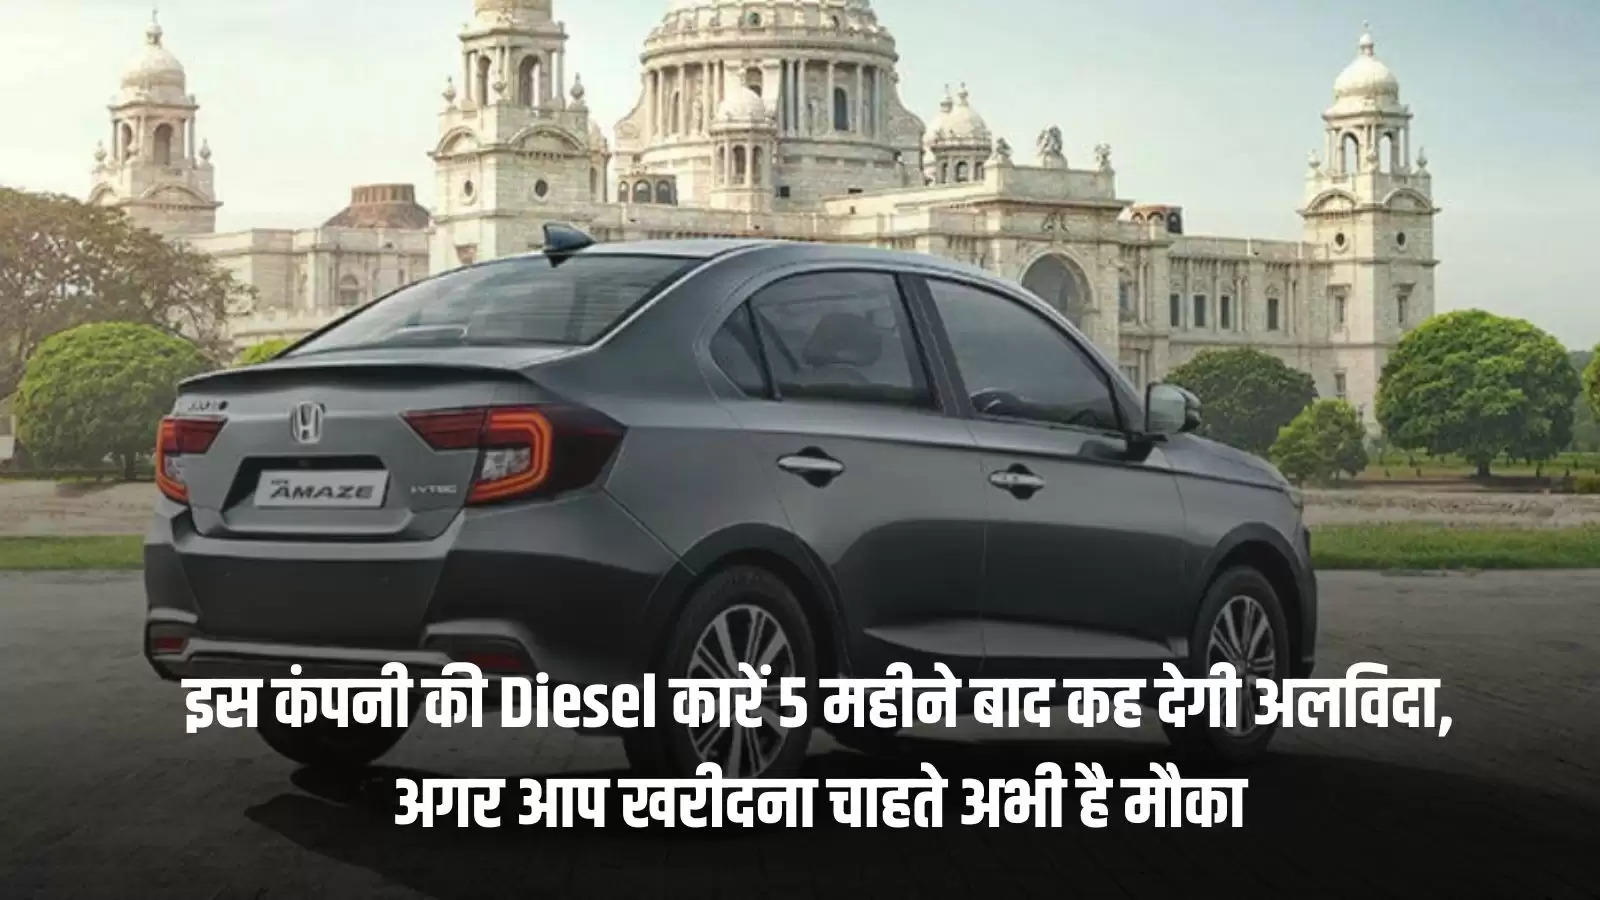 Diesel Cars to Discontinued in India